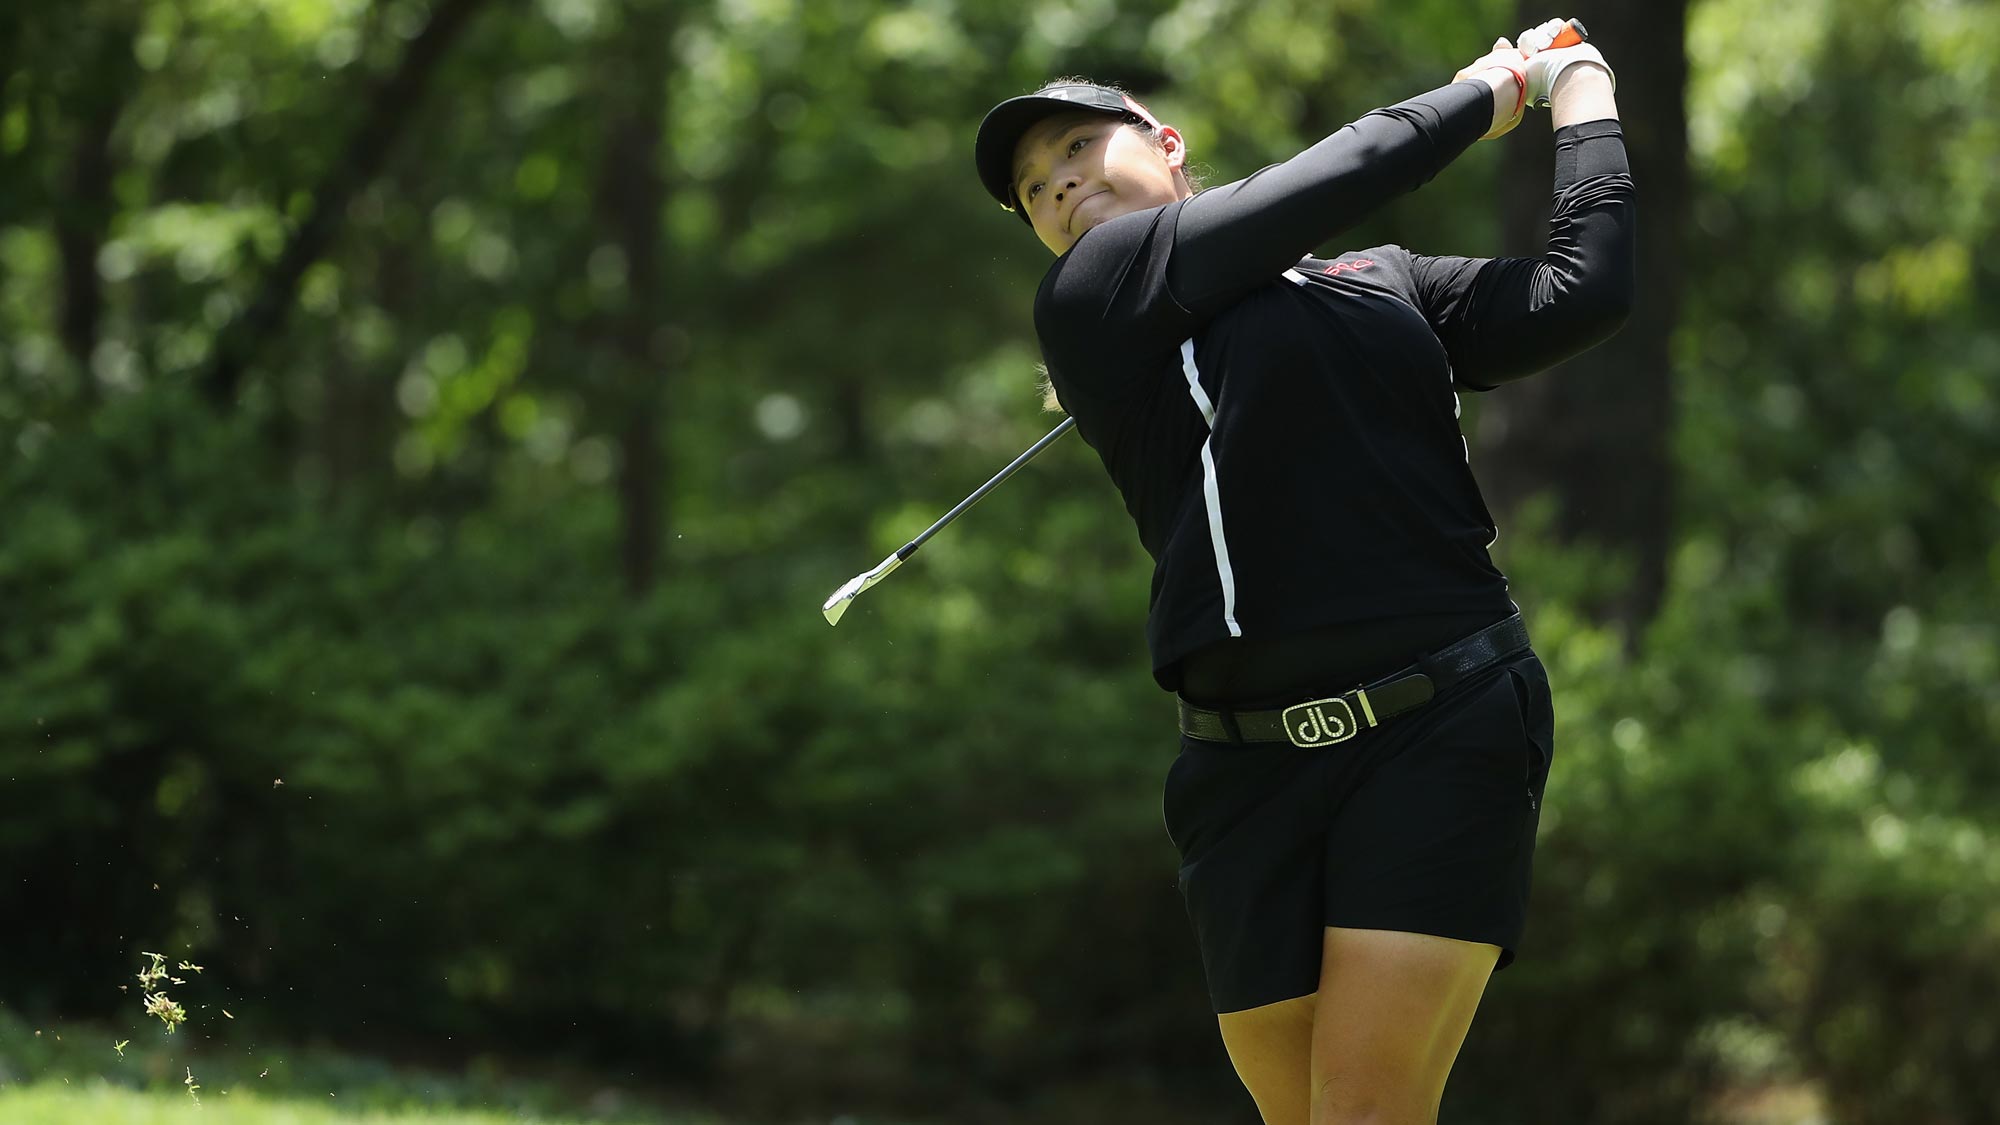 Ariya Jutanugarn of Thailand plays a tee shot on the second hole during the final round of the 2018 U.S. Women's Open